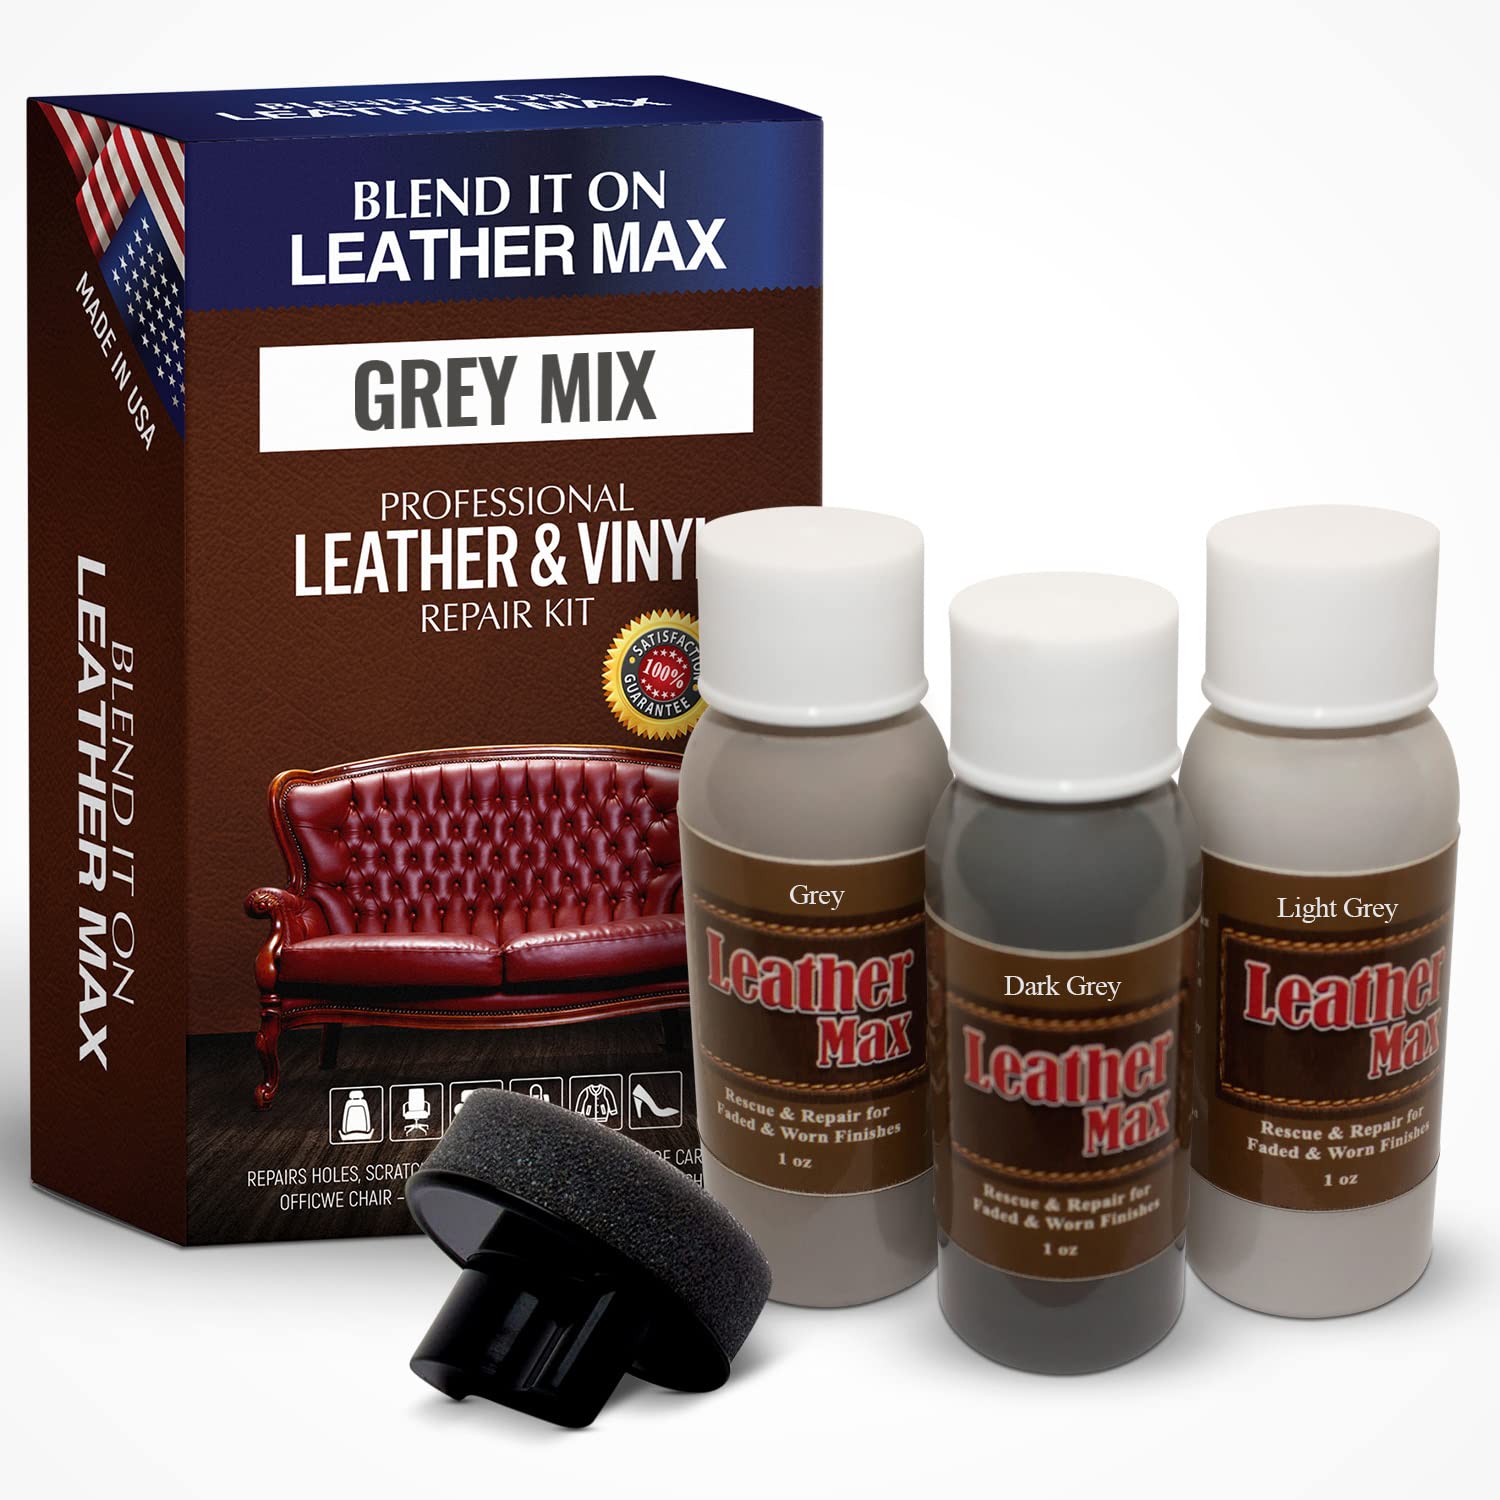 Leather Max Quick Blend Refinish and Repair Kit, Restore Couches, Recolor  Furniture & Repair Car Seats, Jackets, Sofa, Boots / 3 Color Shades to  Blend with/Leather Vinyl Bonded and More (Grey Mix)